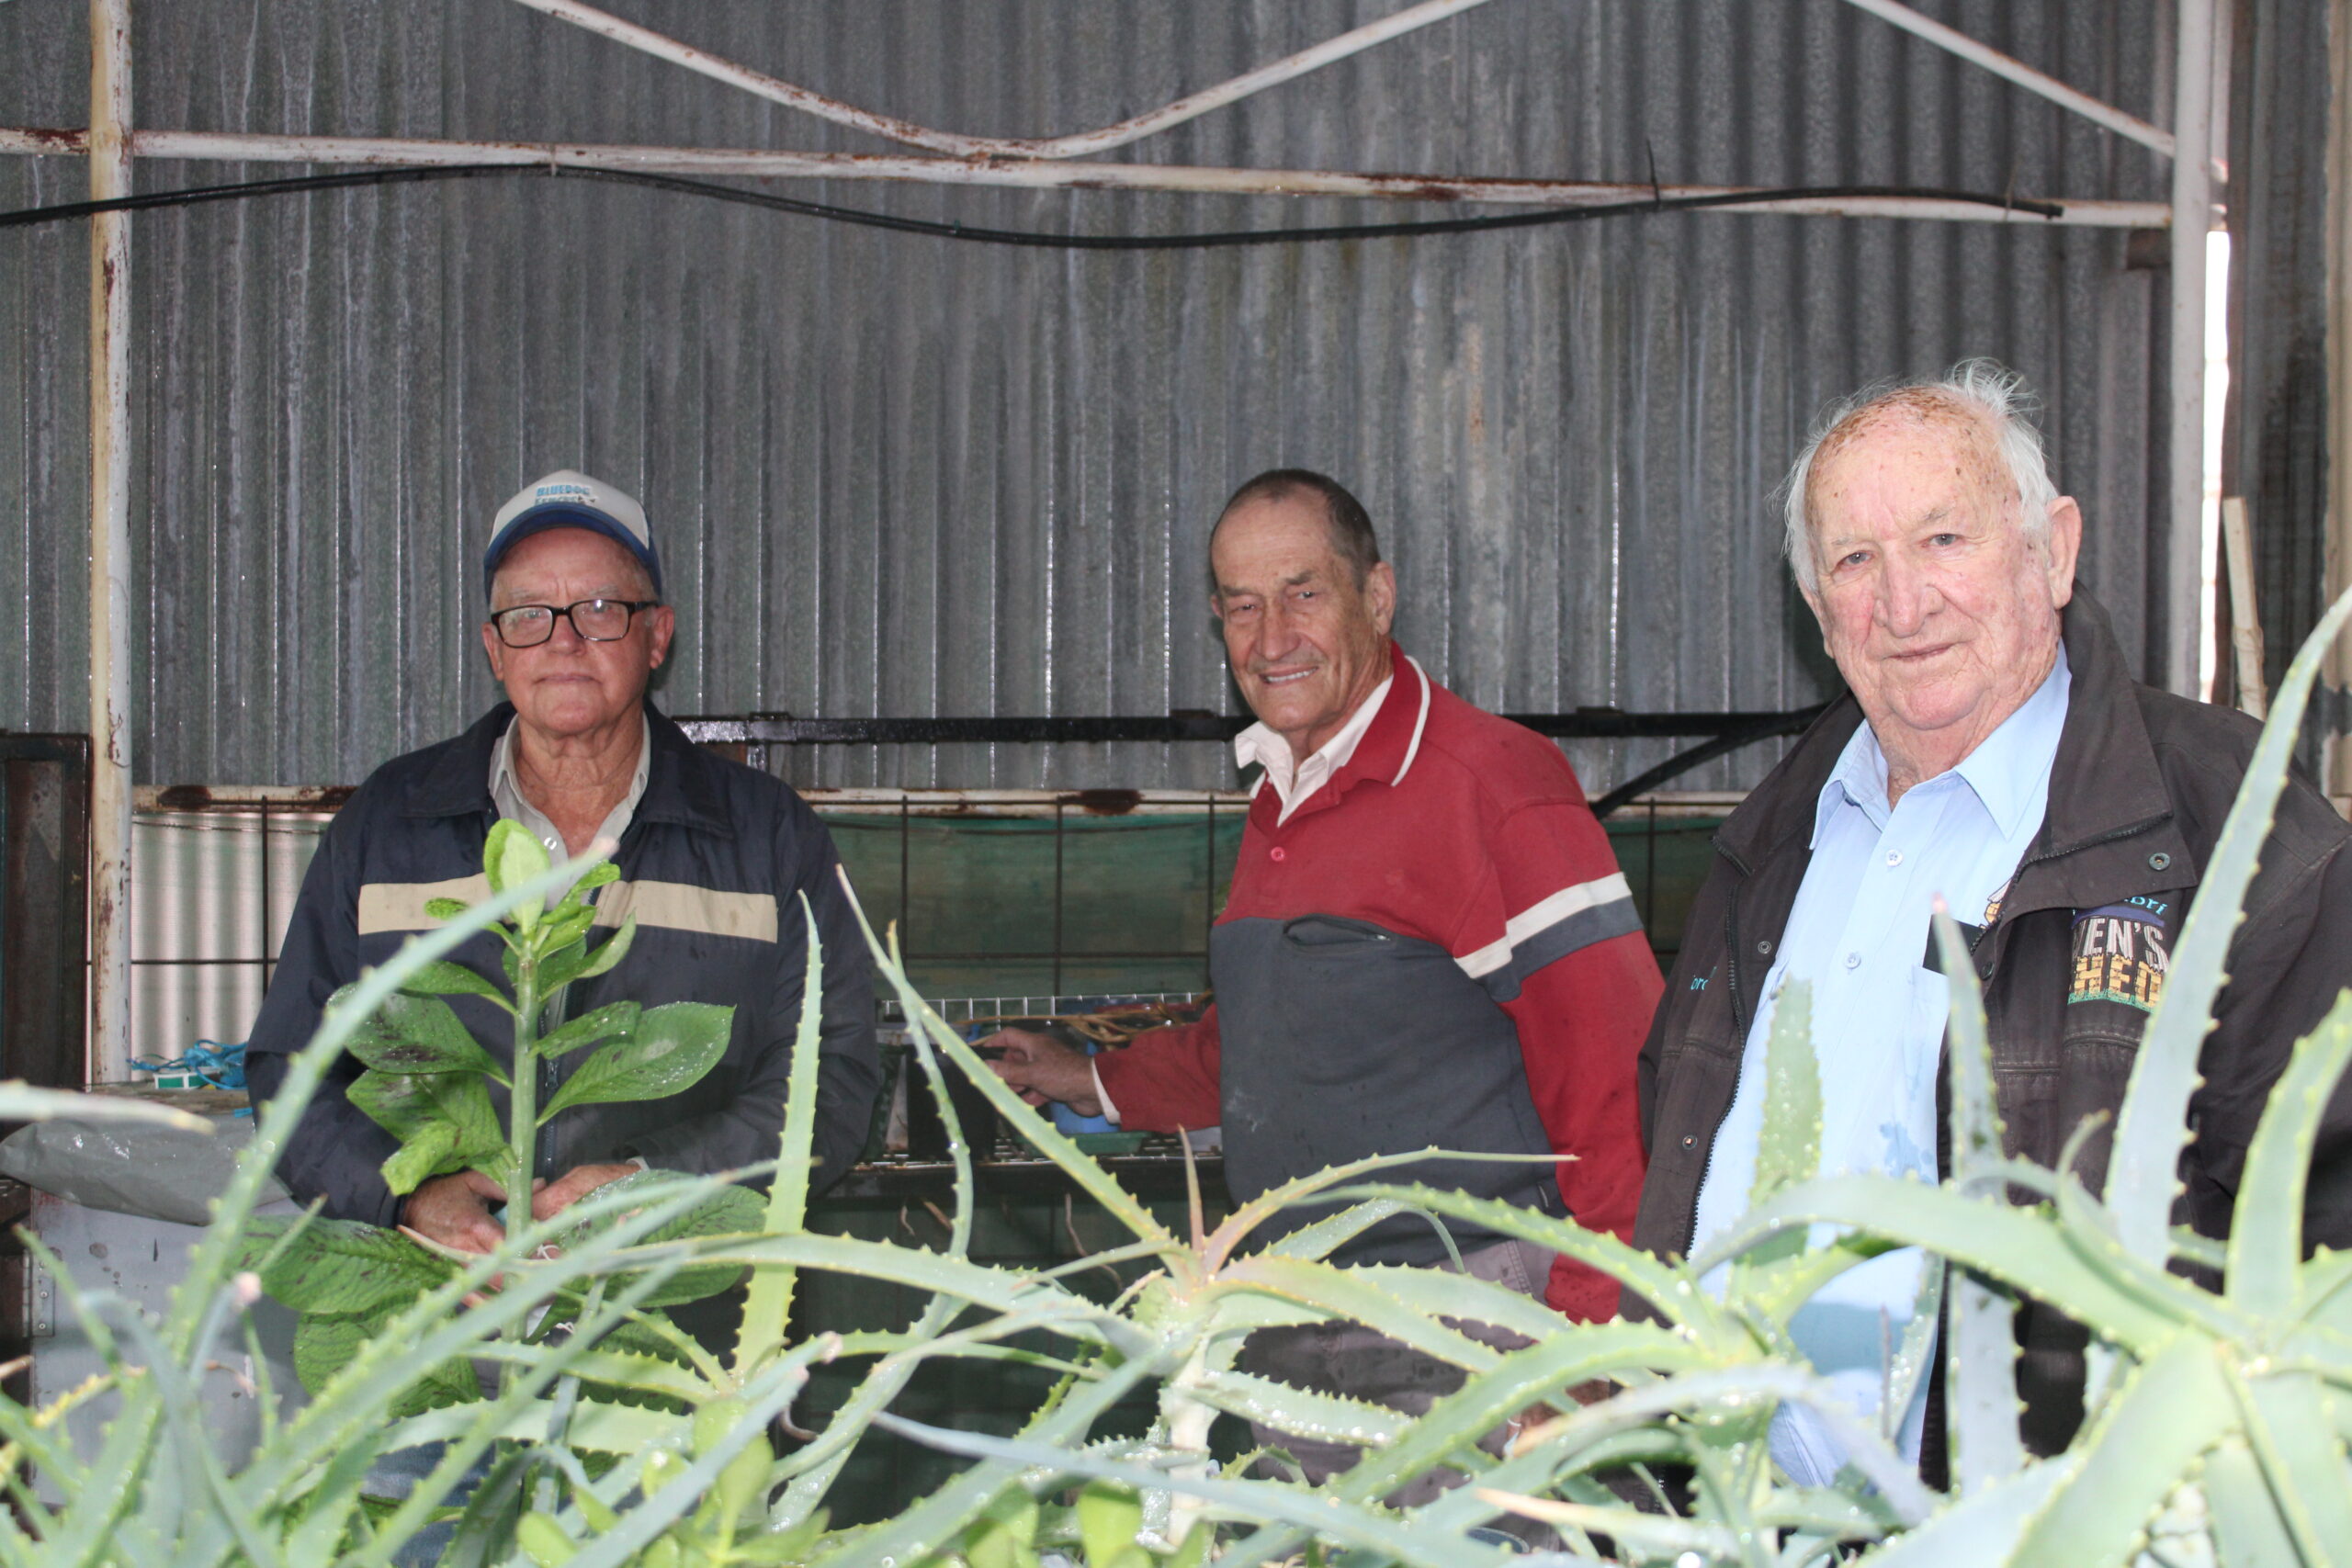 Ron Woods, Ian Schweitzer and Gordon Cain in the greenhouse.